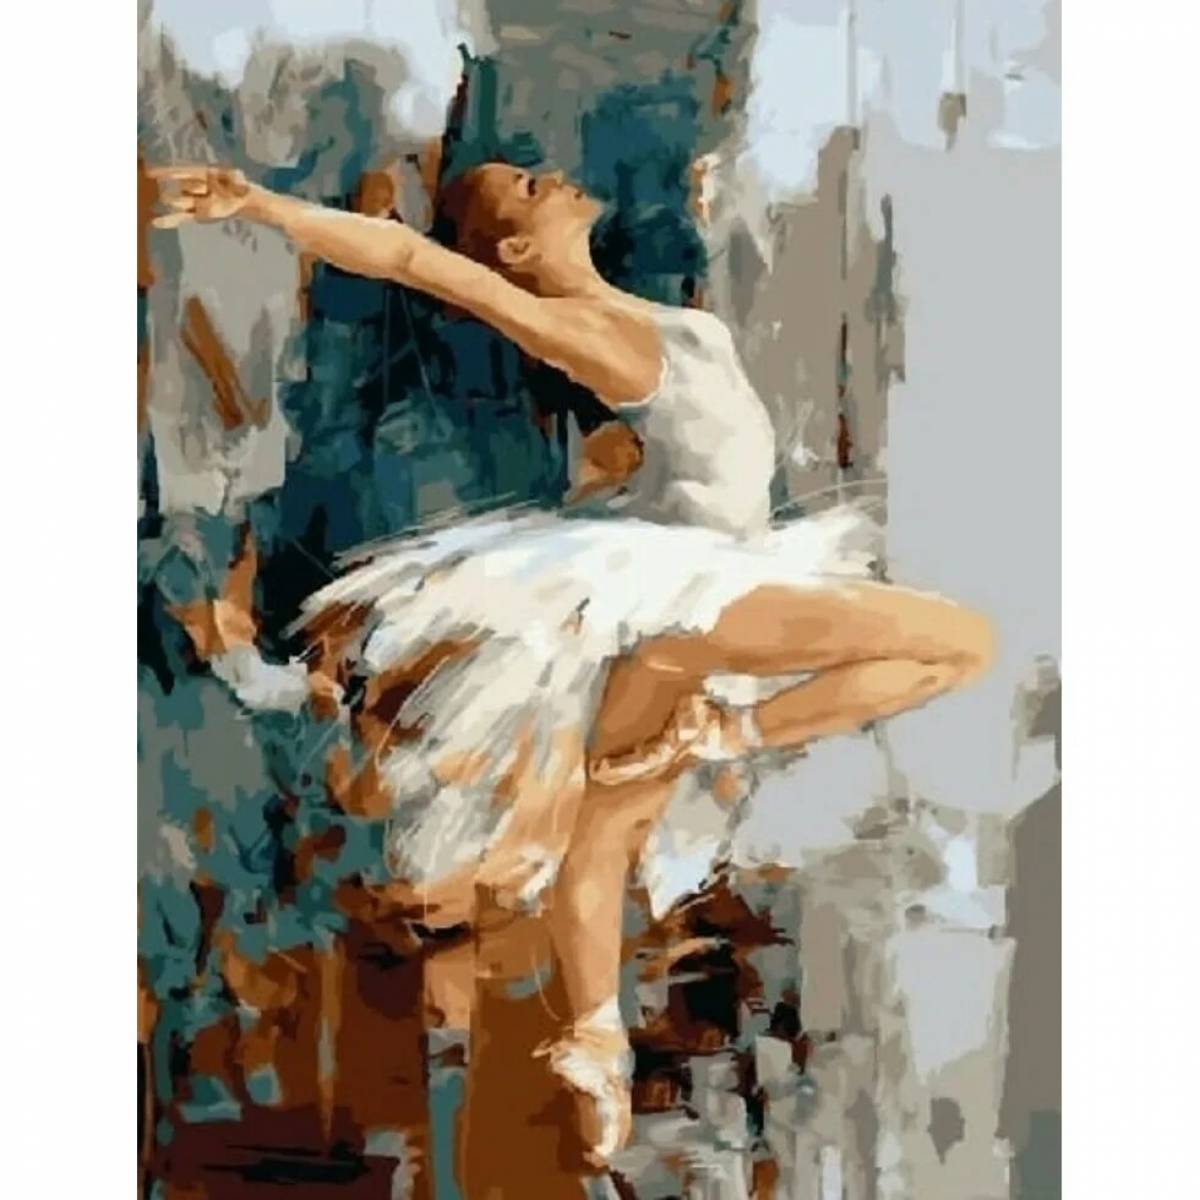 Decorated ballerina coloring by numbers